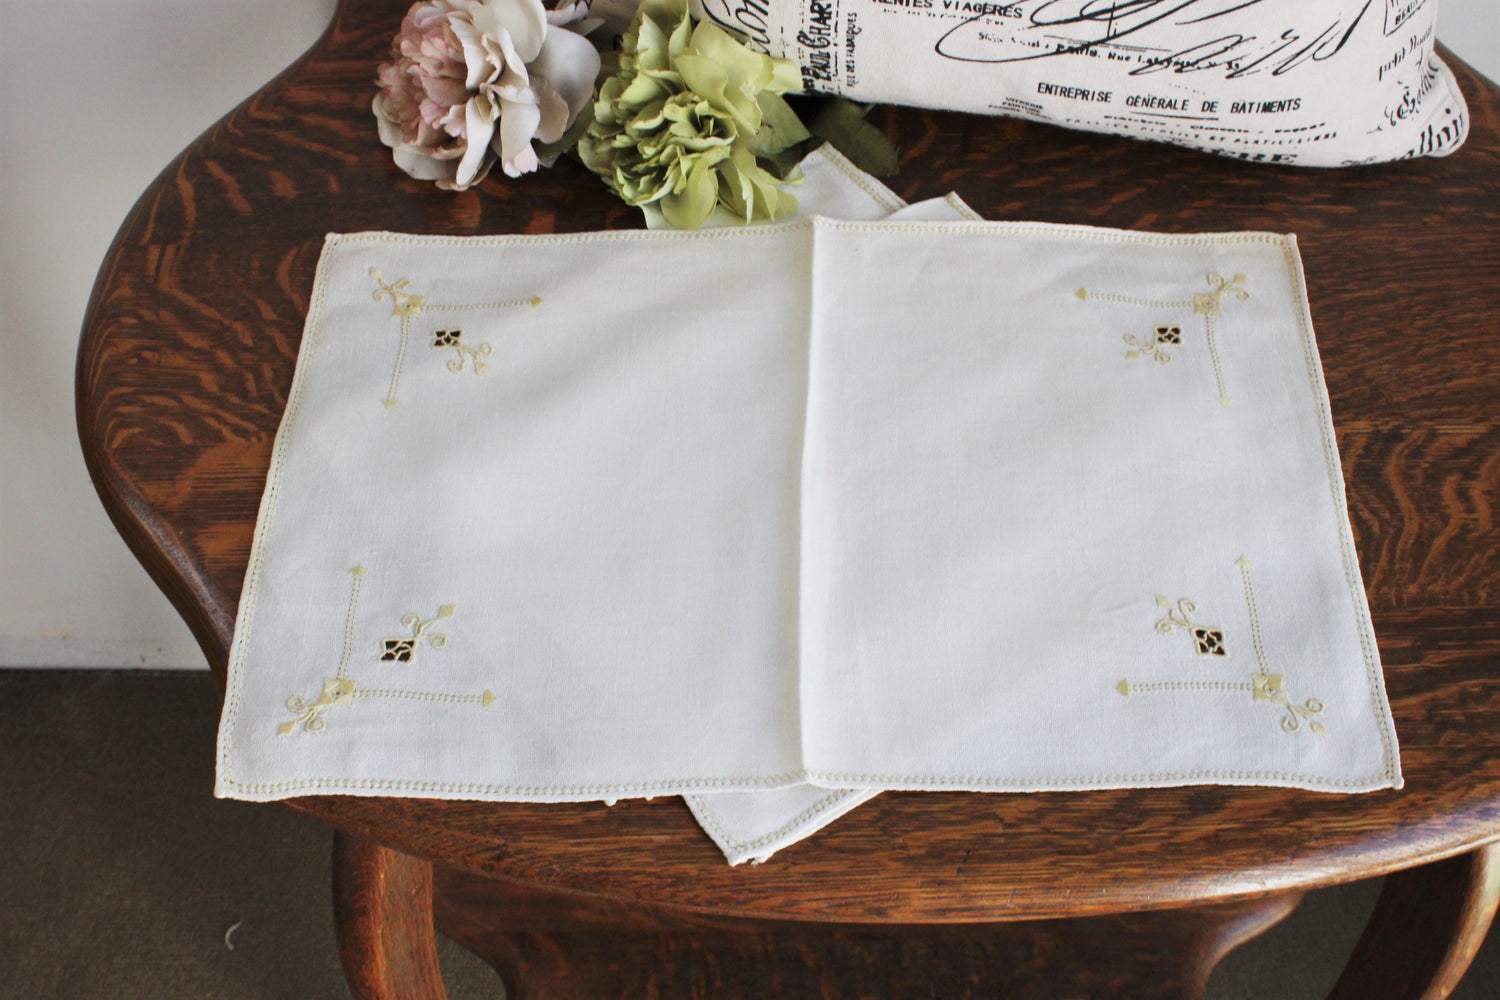 Vintage 1930s Linen Placemats, Set of Four With Gold Yellow Embroidery